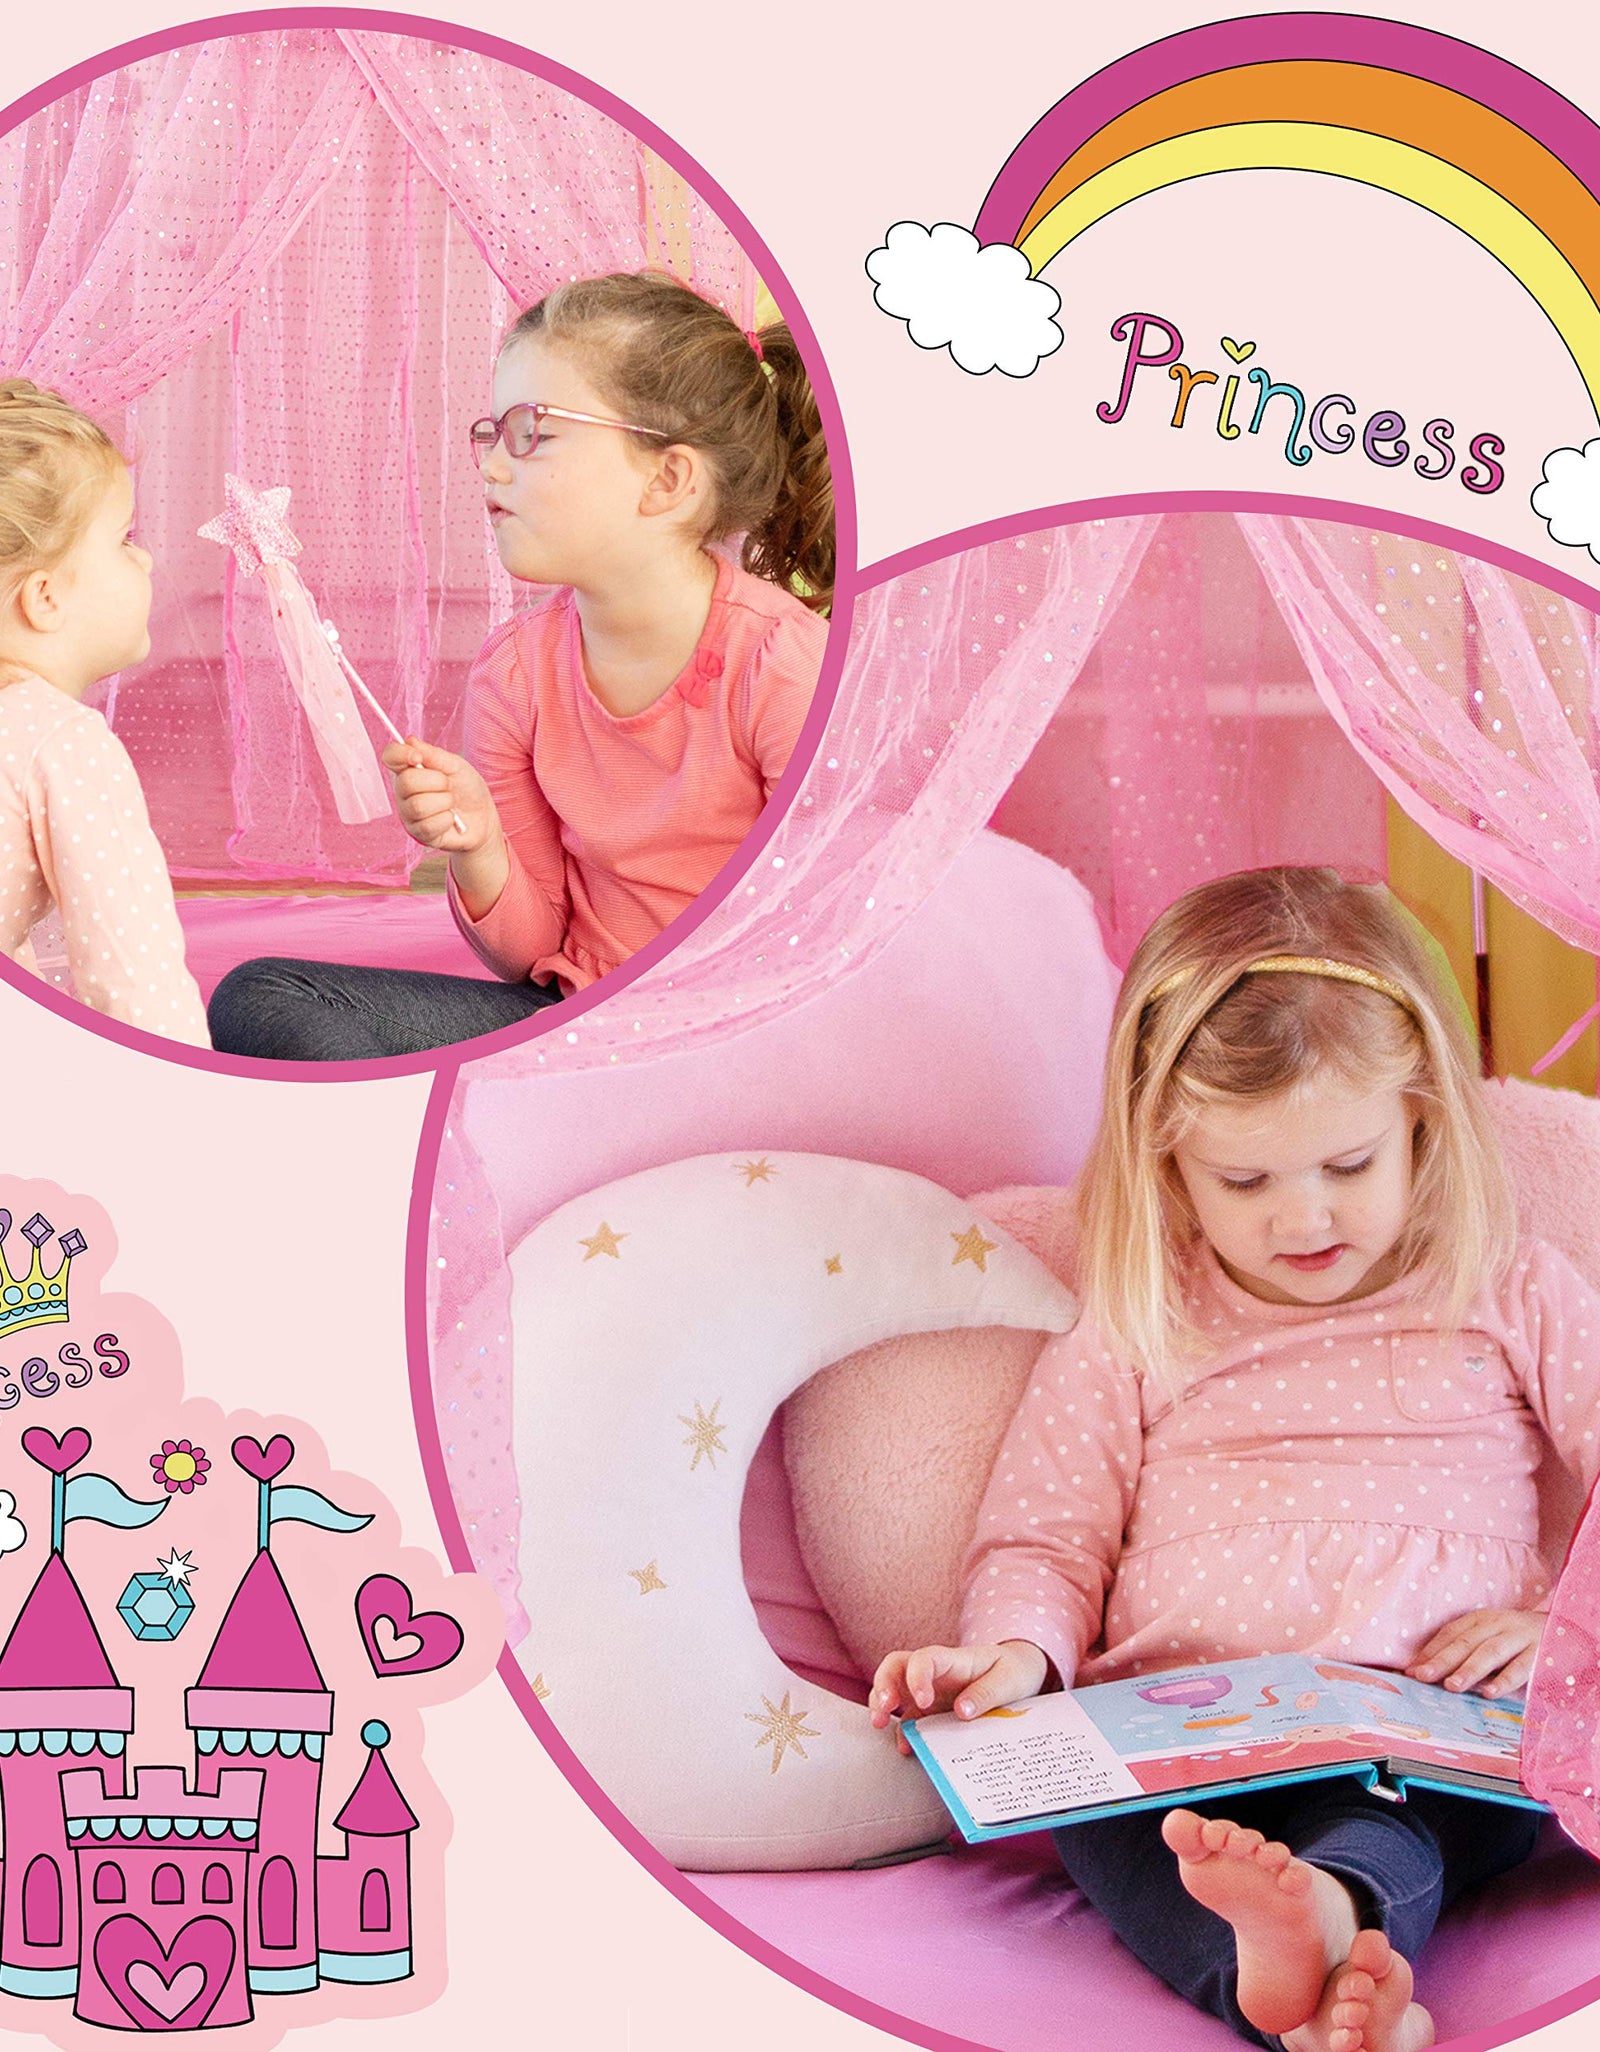 Tiny Land Princess Castle Play Tent With Glitter Dot, Pack in A Carrying Case, 2 Kids Foldable Pop Up Pink Play Tent/House Toy For Indoor and Outdoor Use, 41"Dx 55“H